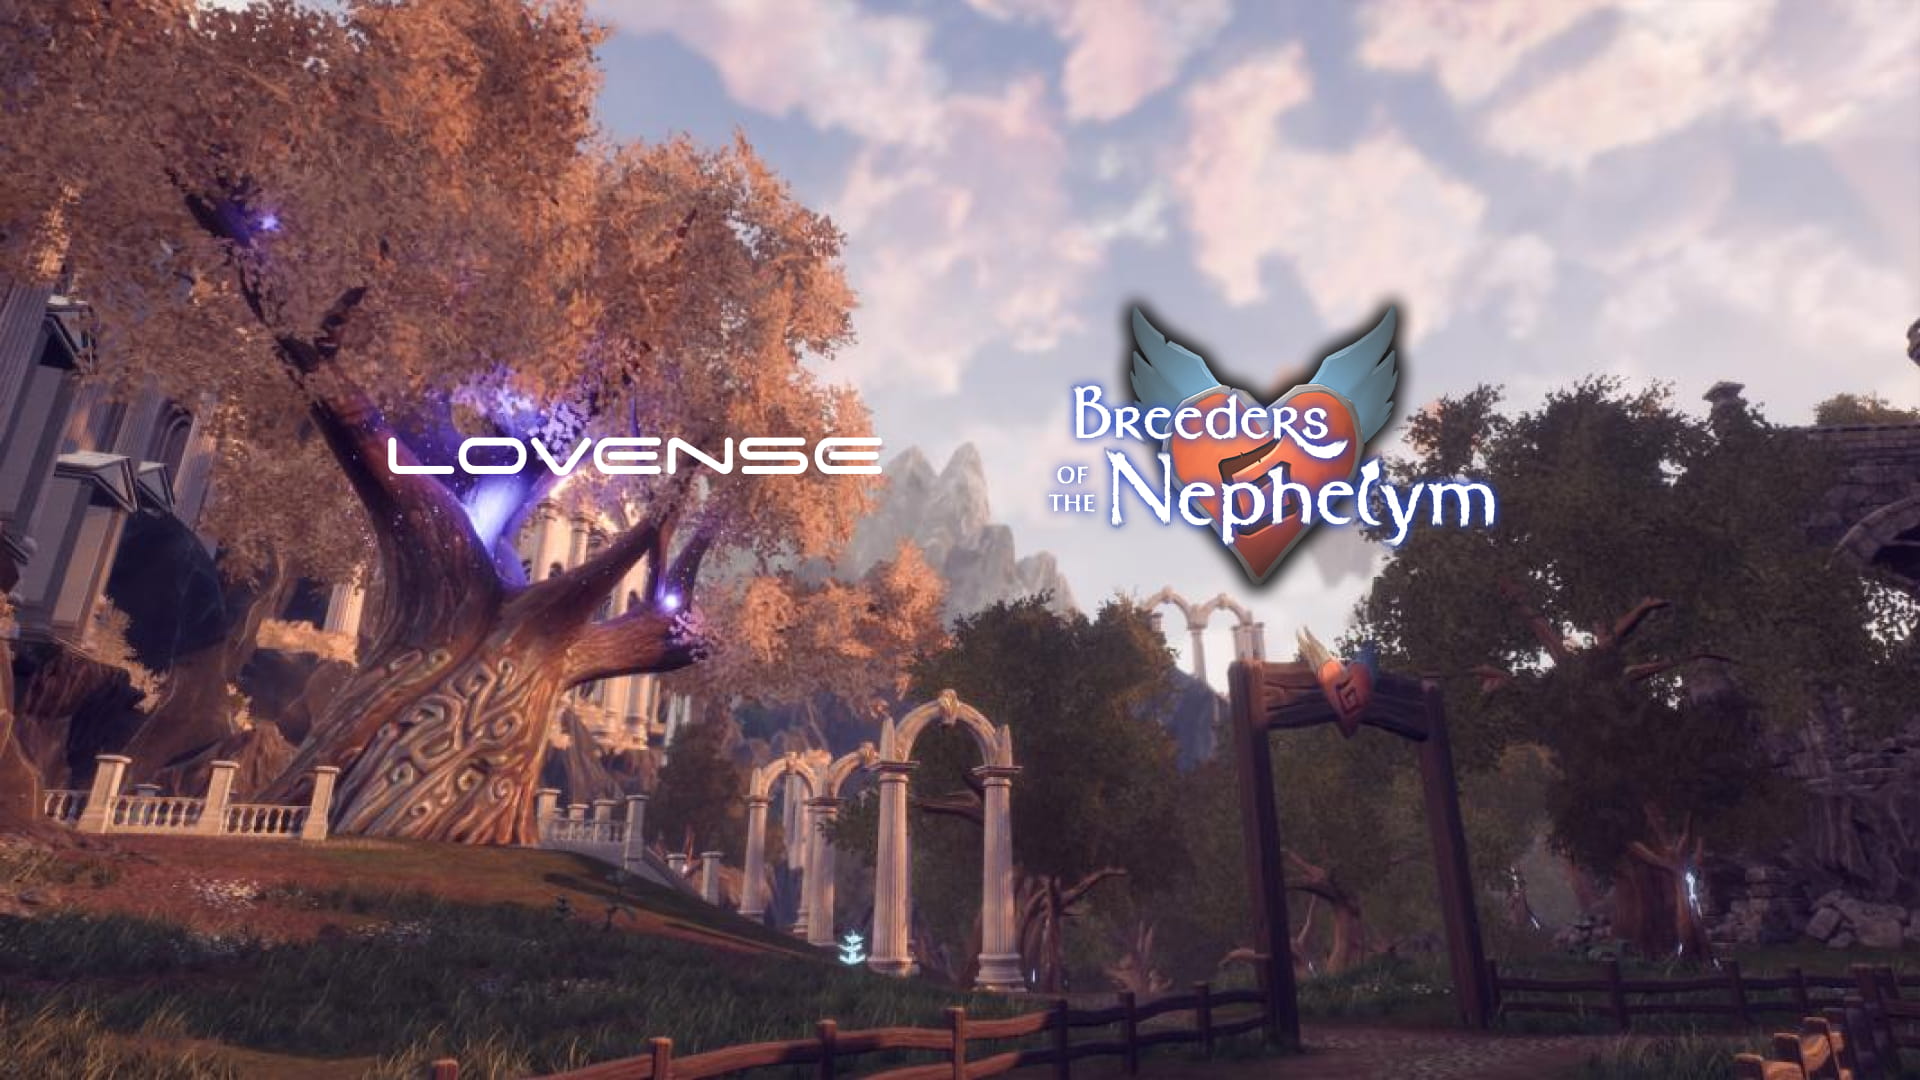 Breeders of The Nephelym integration with Lovense